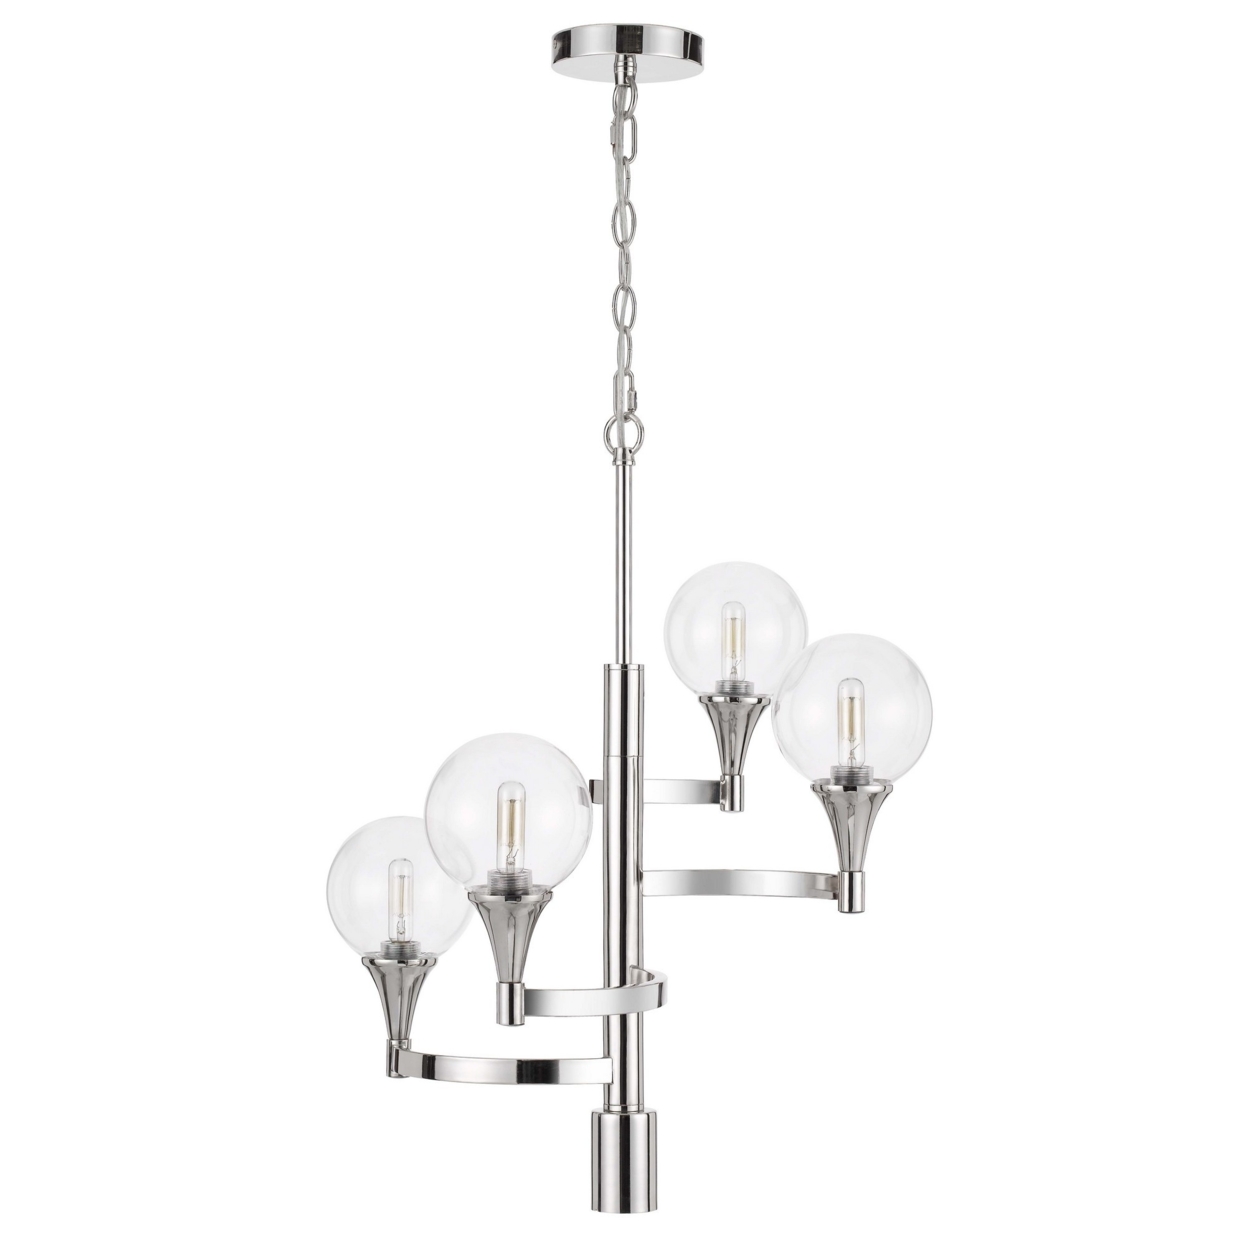 Chandelier With 4 Globe Glass Shades And Cone Design Holders, Chrome- Saltoro Sherpi